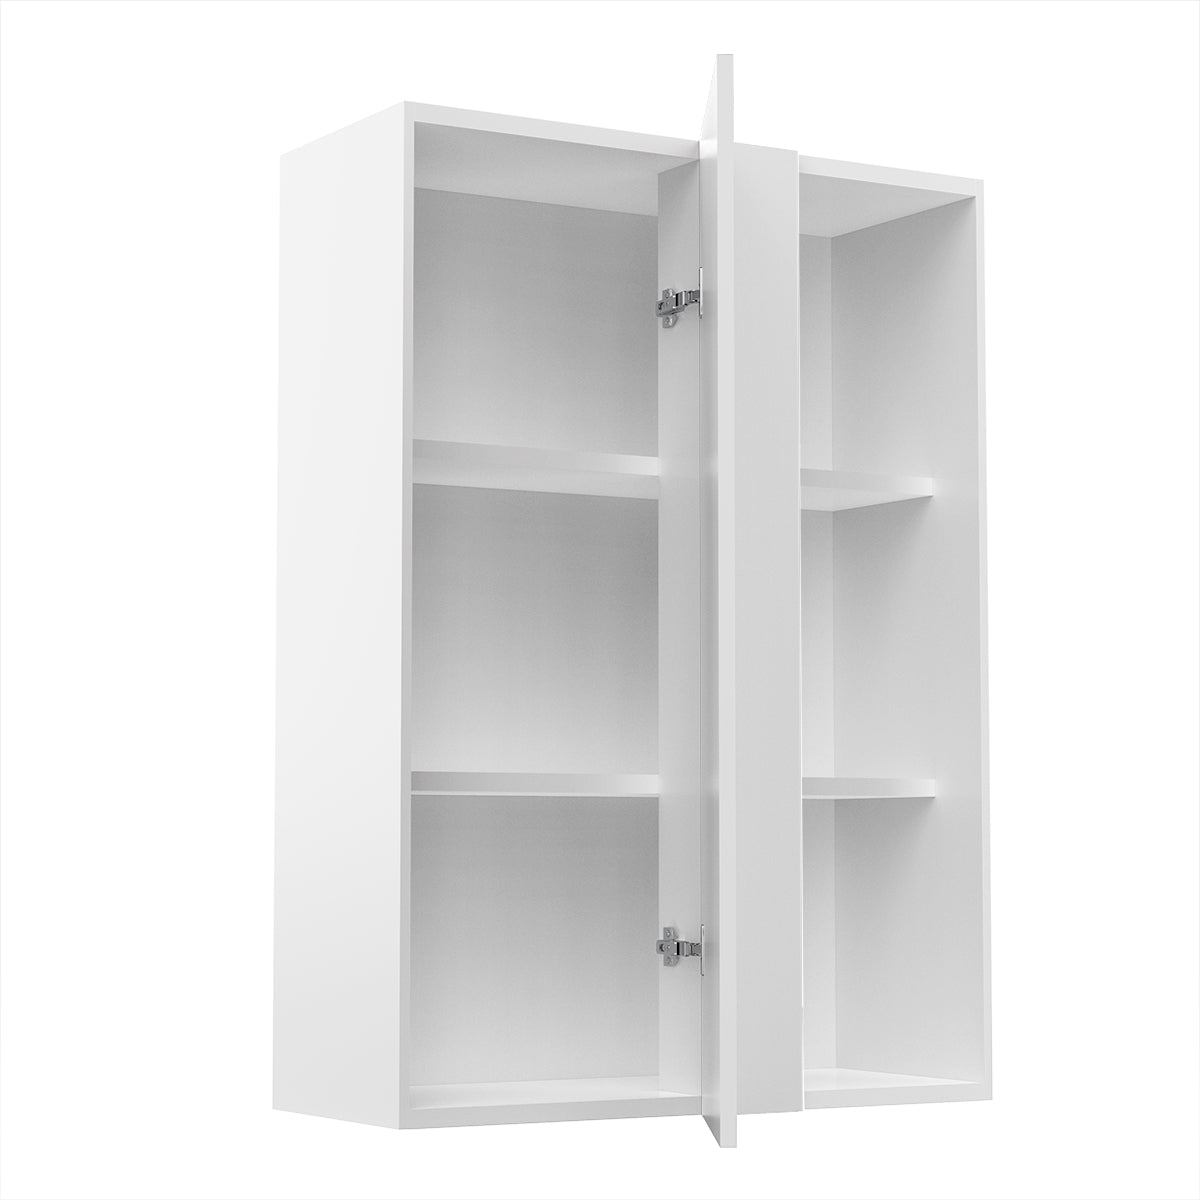 RTA - Glossy White - Single Door Wall Cabinets | 30"W x 42"H x 12"D